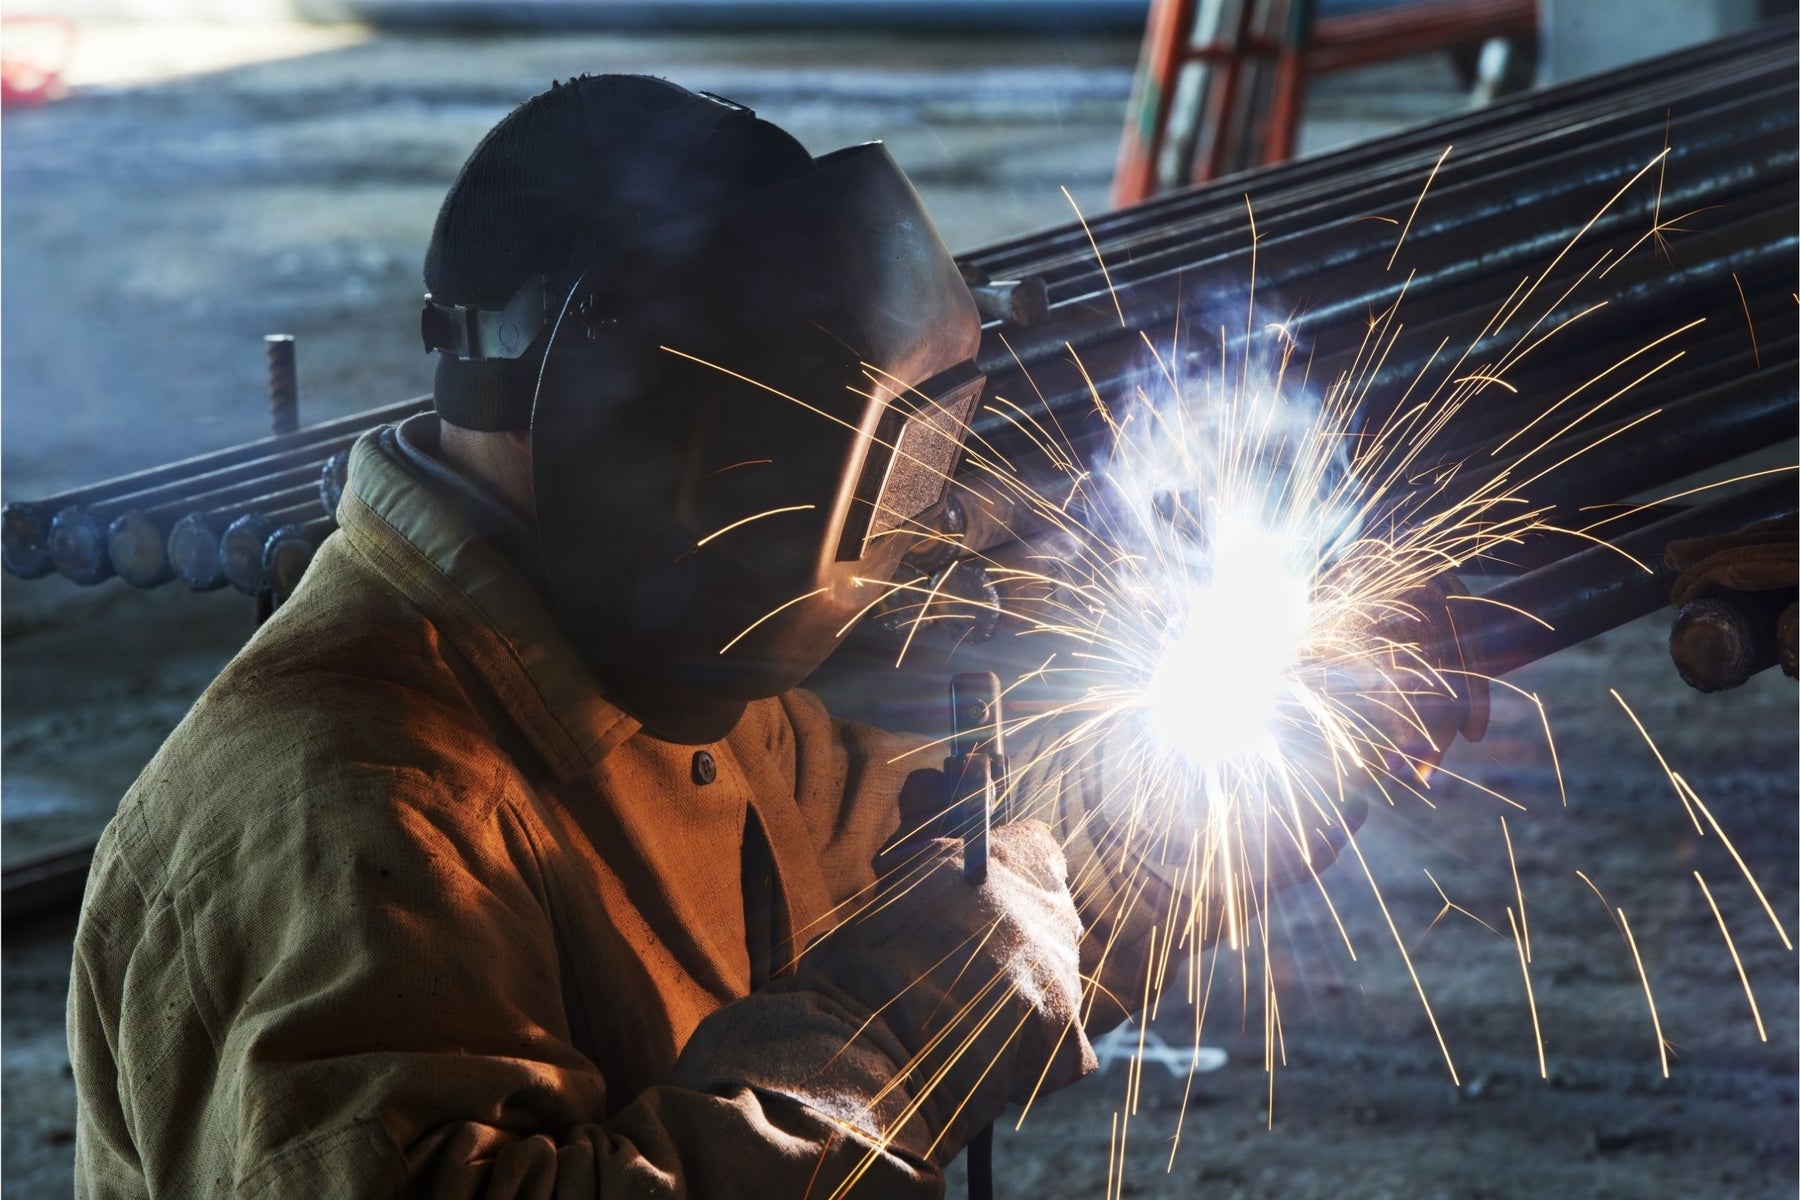 Learn Welding Skills: 5 Projects For Beginners